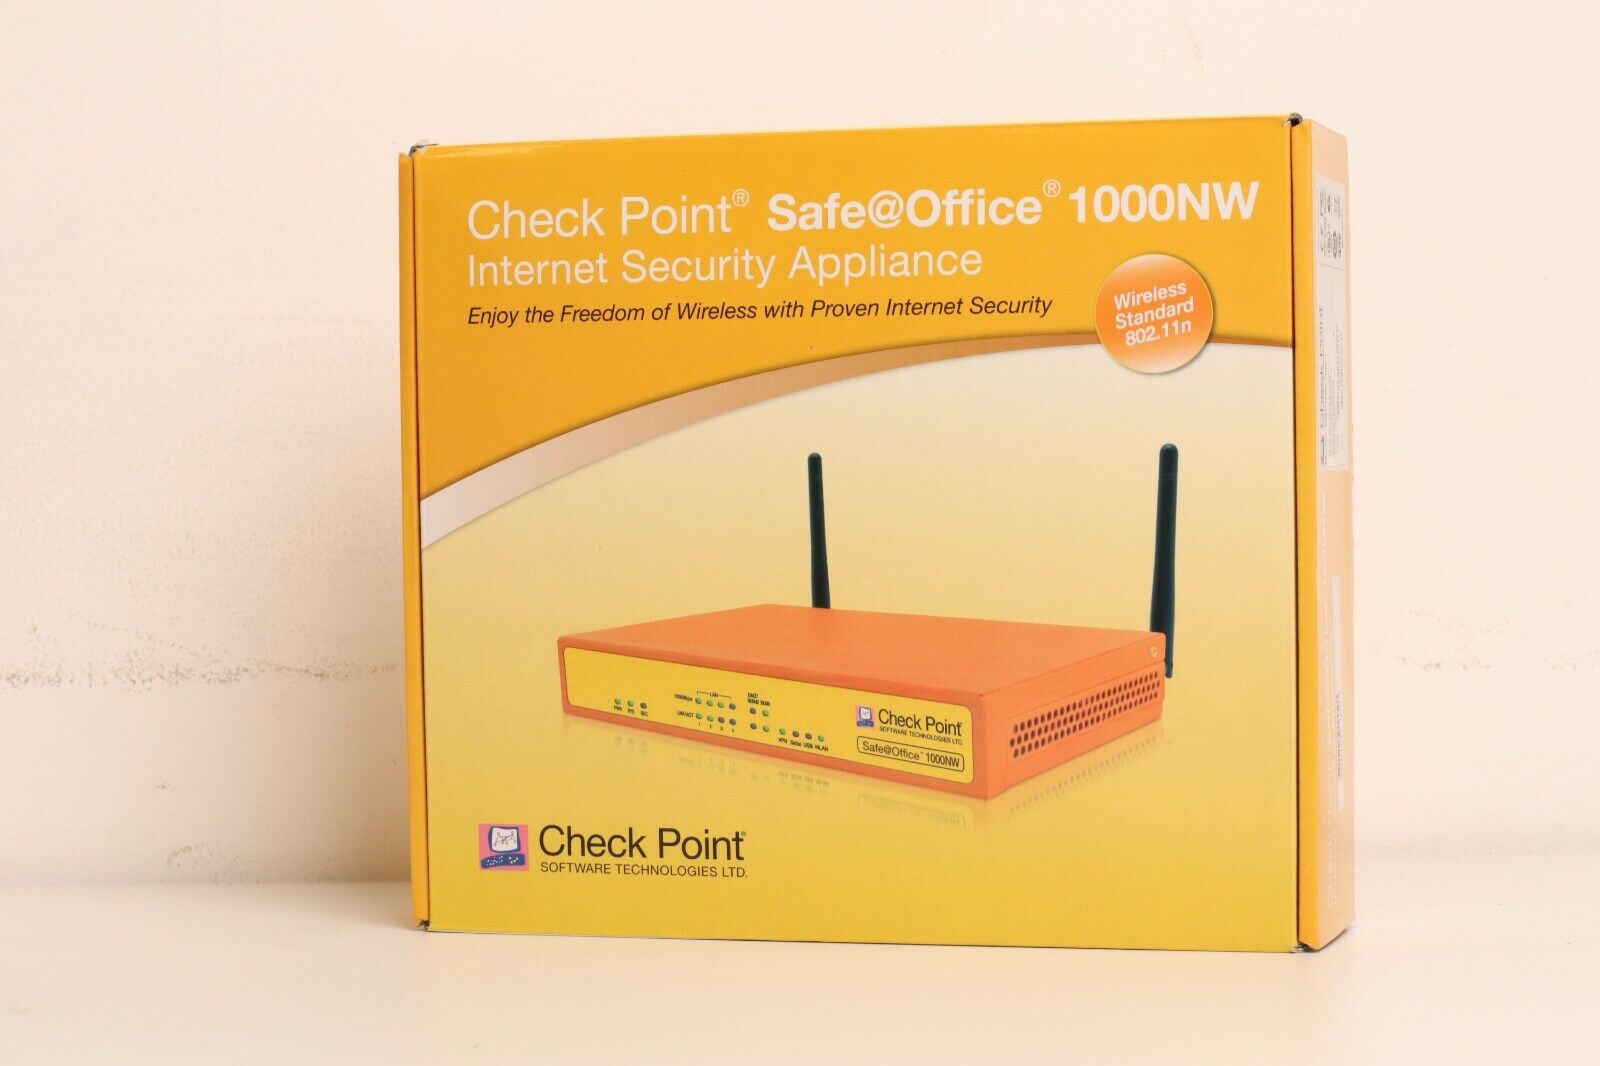 Check Point Firewall SBXNW-100-1 Wireless Gateway Router 1000NW